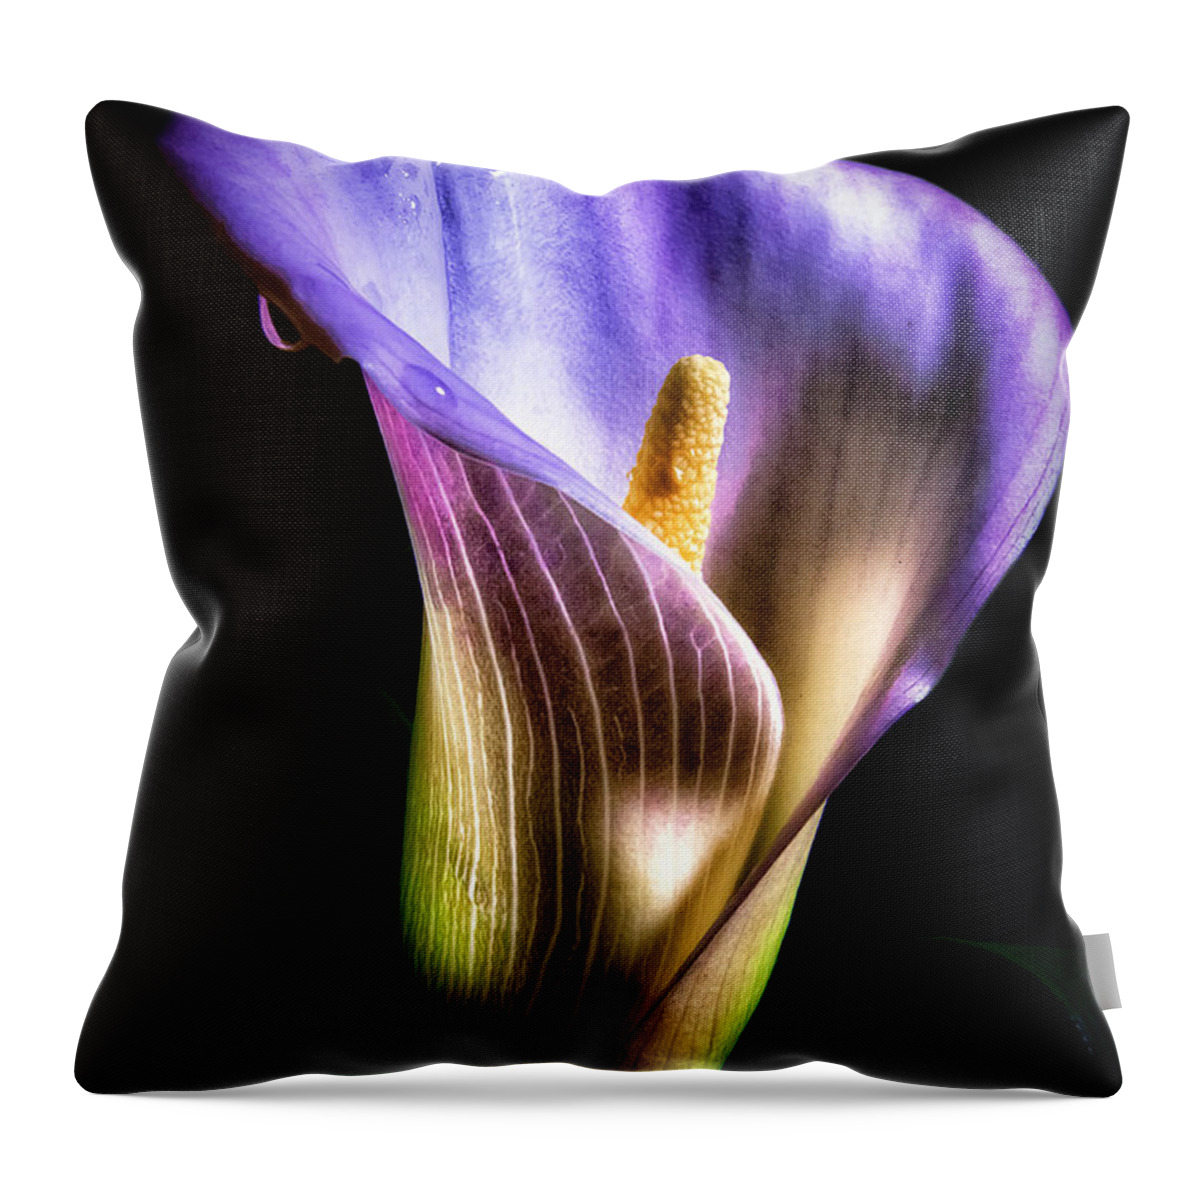 Flower Throw Pillow featuring the photograph Colors by Don Hoekwater Photography